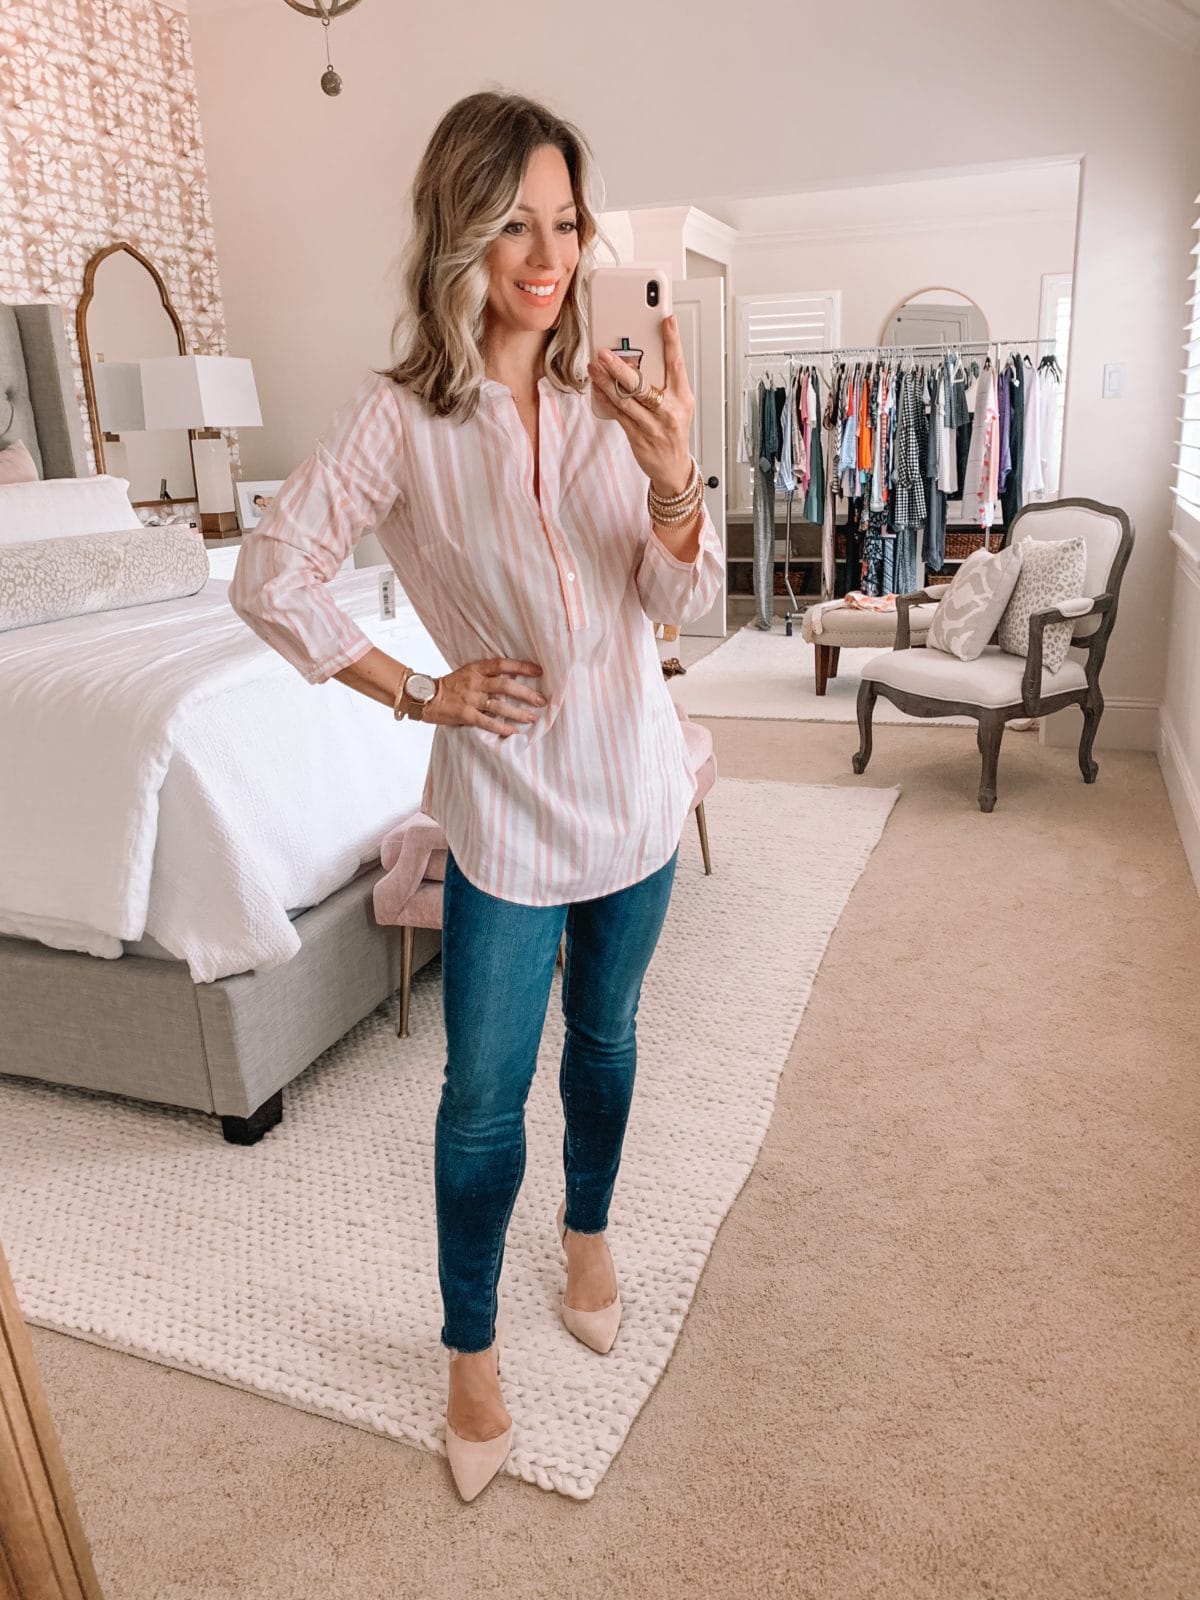 Amazon Fashion Finds, Striped Tunic Top, Skinny Jeans, Heels 